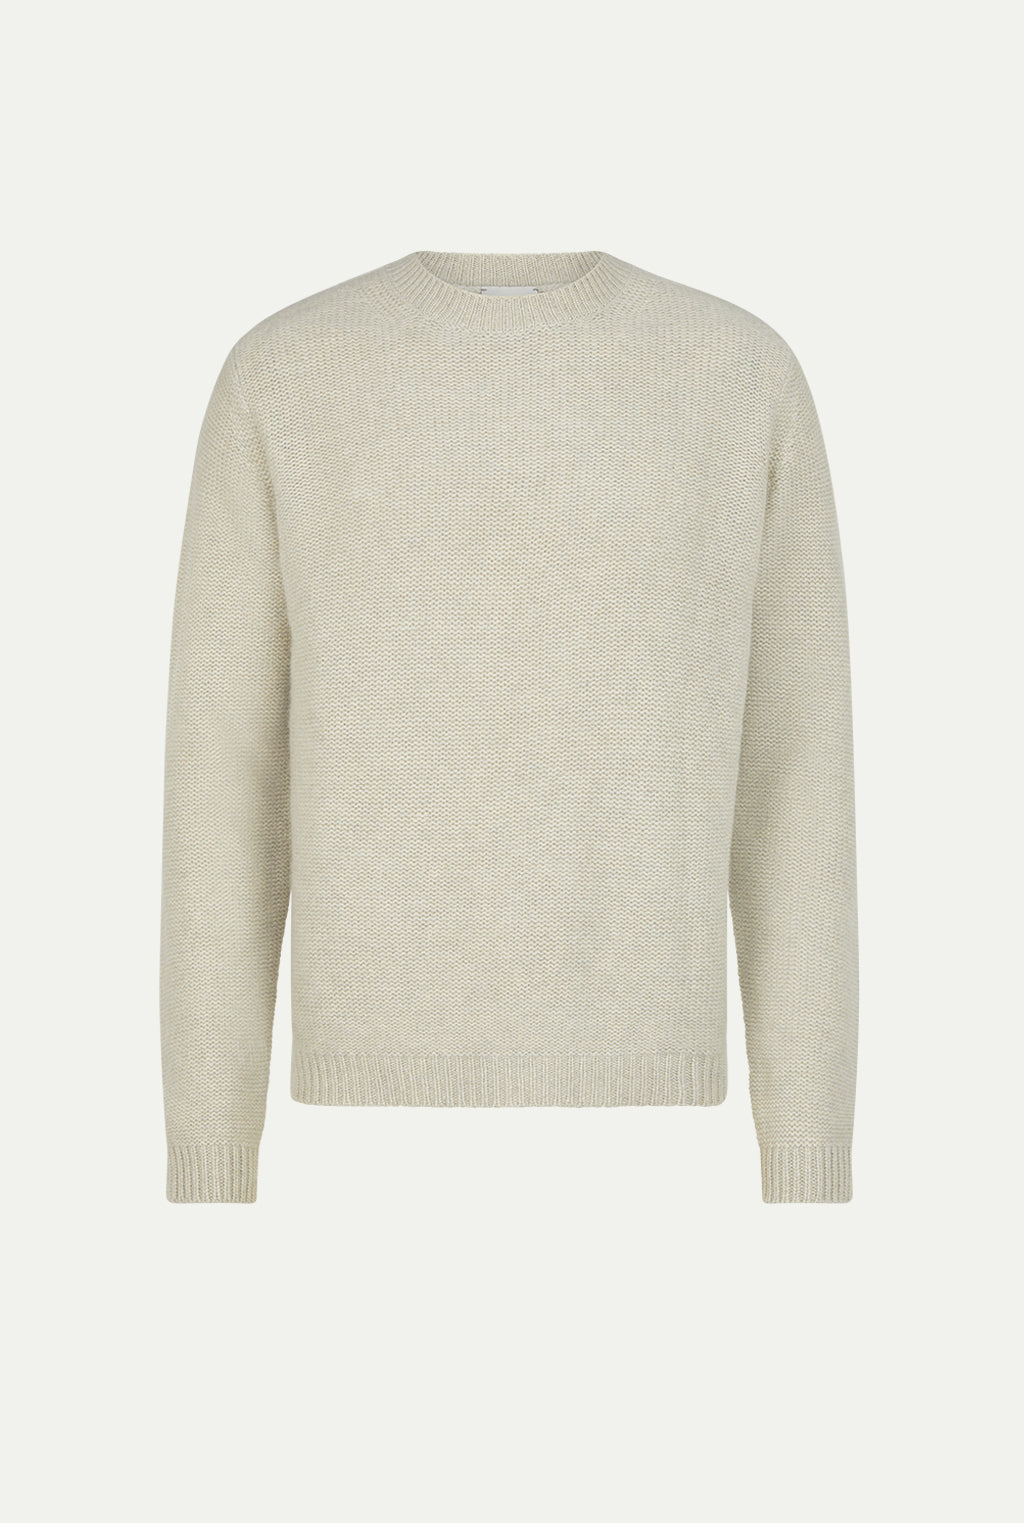 GSTAAD cashmere sweater